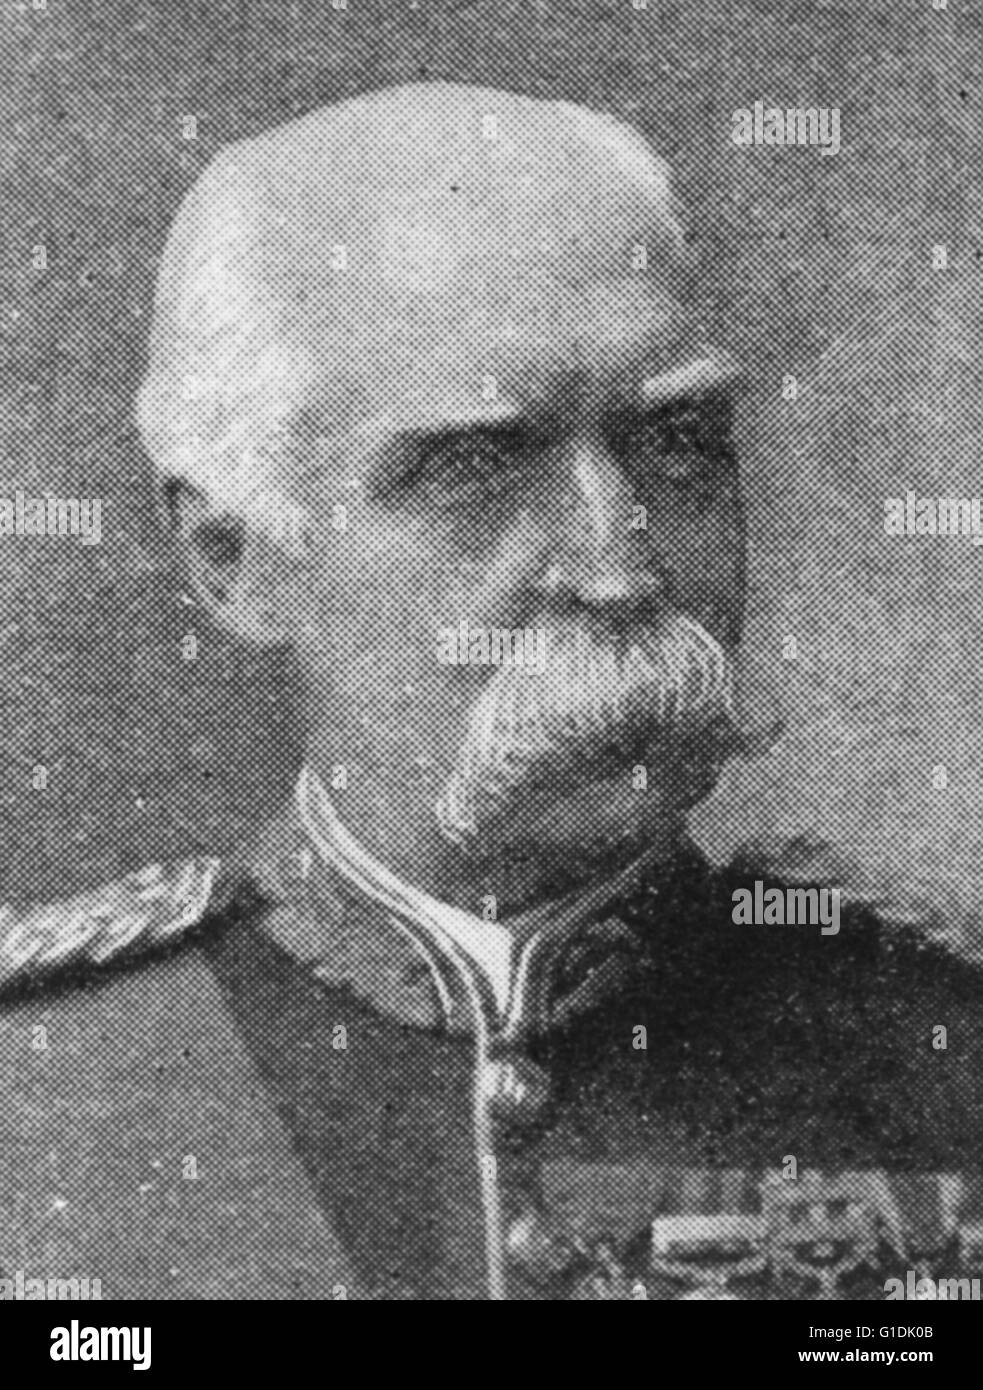 Sir Donald Stewart (1824-1900) British Army officer involved in putting down the Indian Mutiny 1857. Played a key role in the second anglo-afgan war and was later appointed secretary of state for India. 1893. Stock Photo